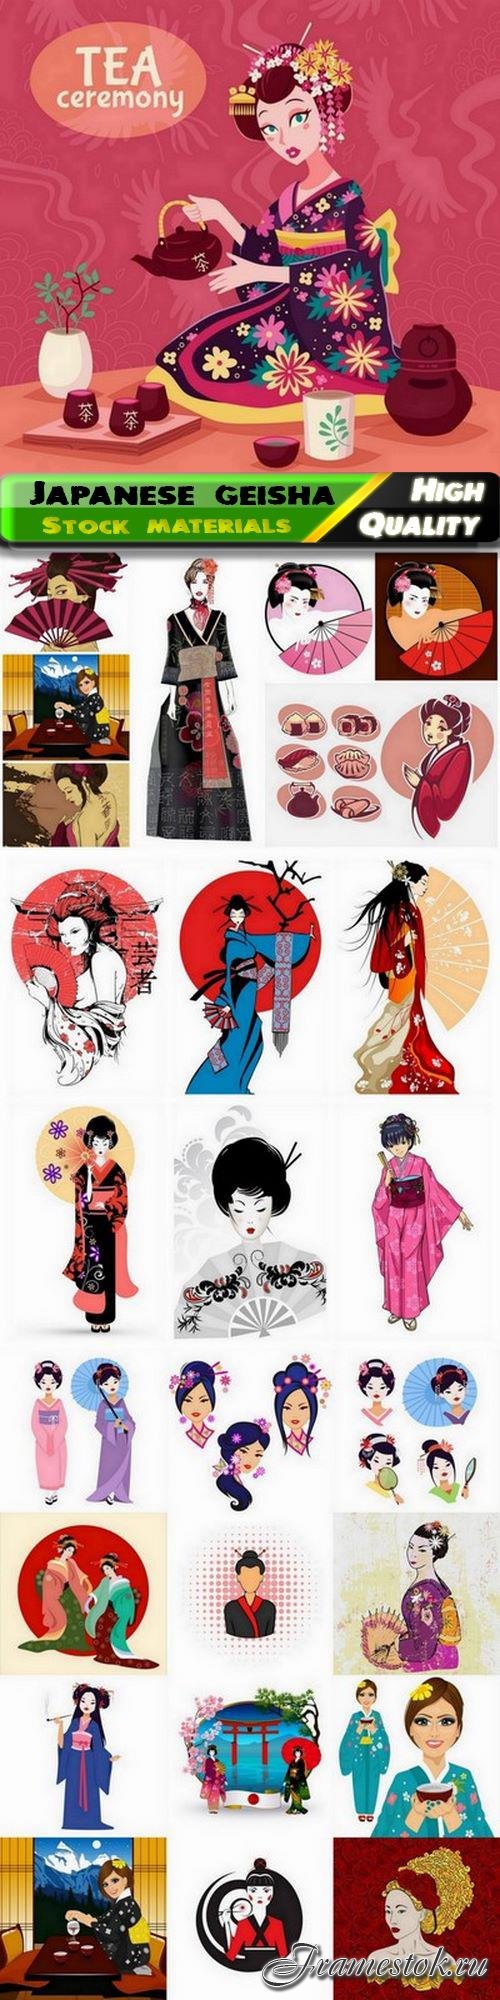 Japanese geisha girl and woman in national dress - 25 Eps